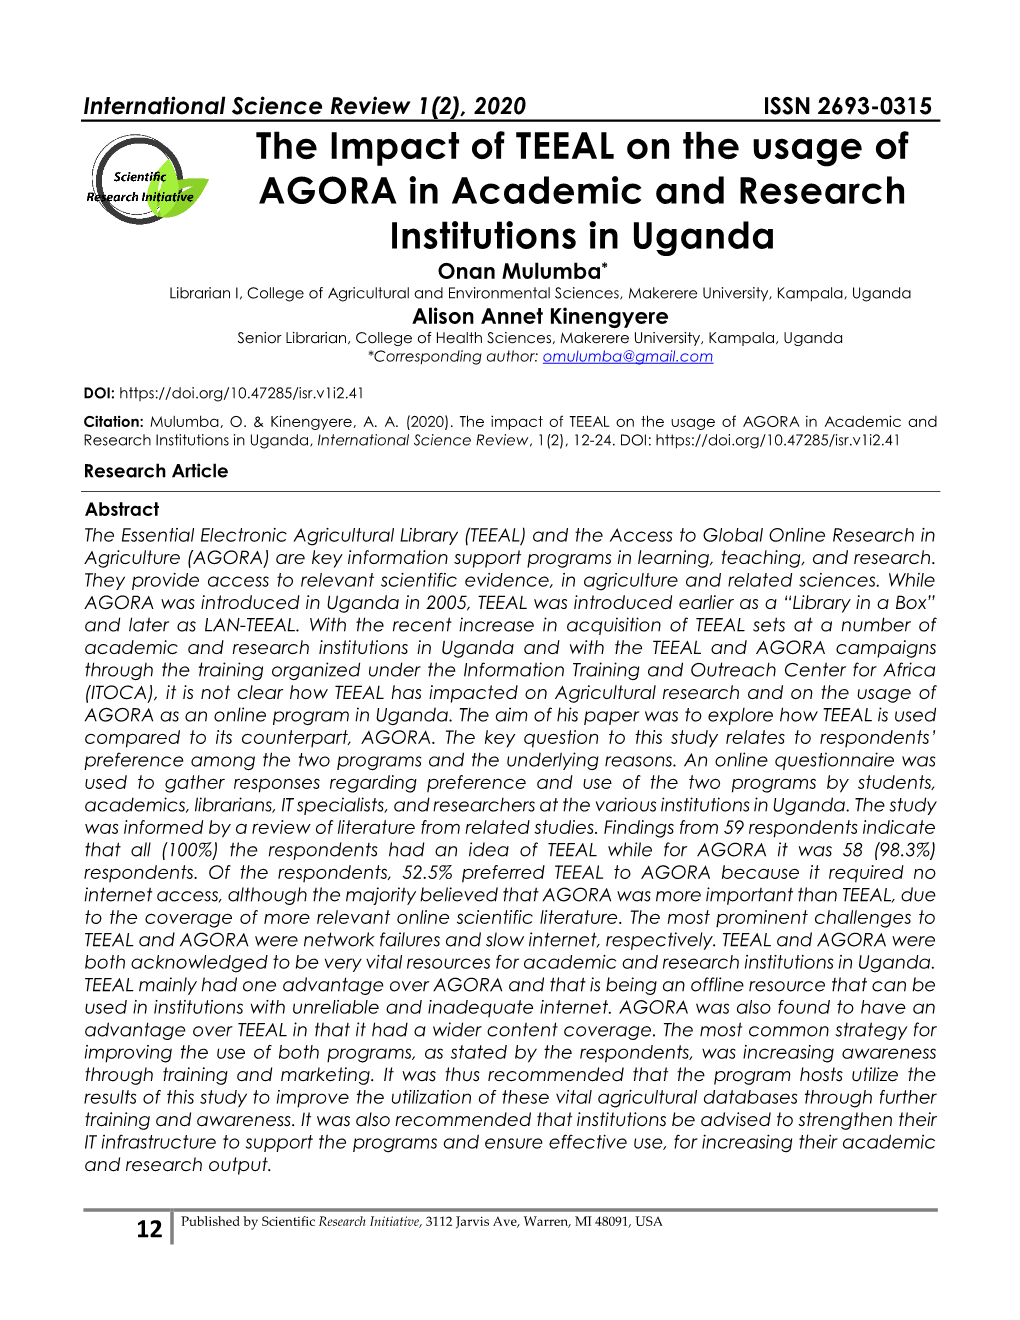 The Impact of TEEAL on the Usage of AGORA in Academic and Research Institutions in Uganda